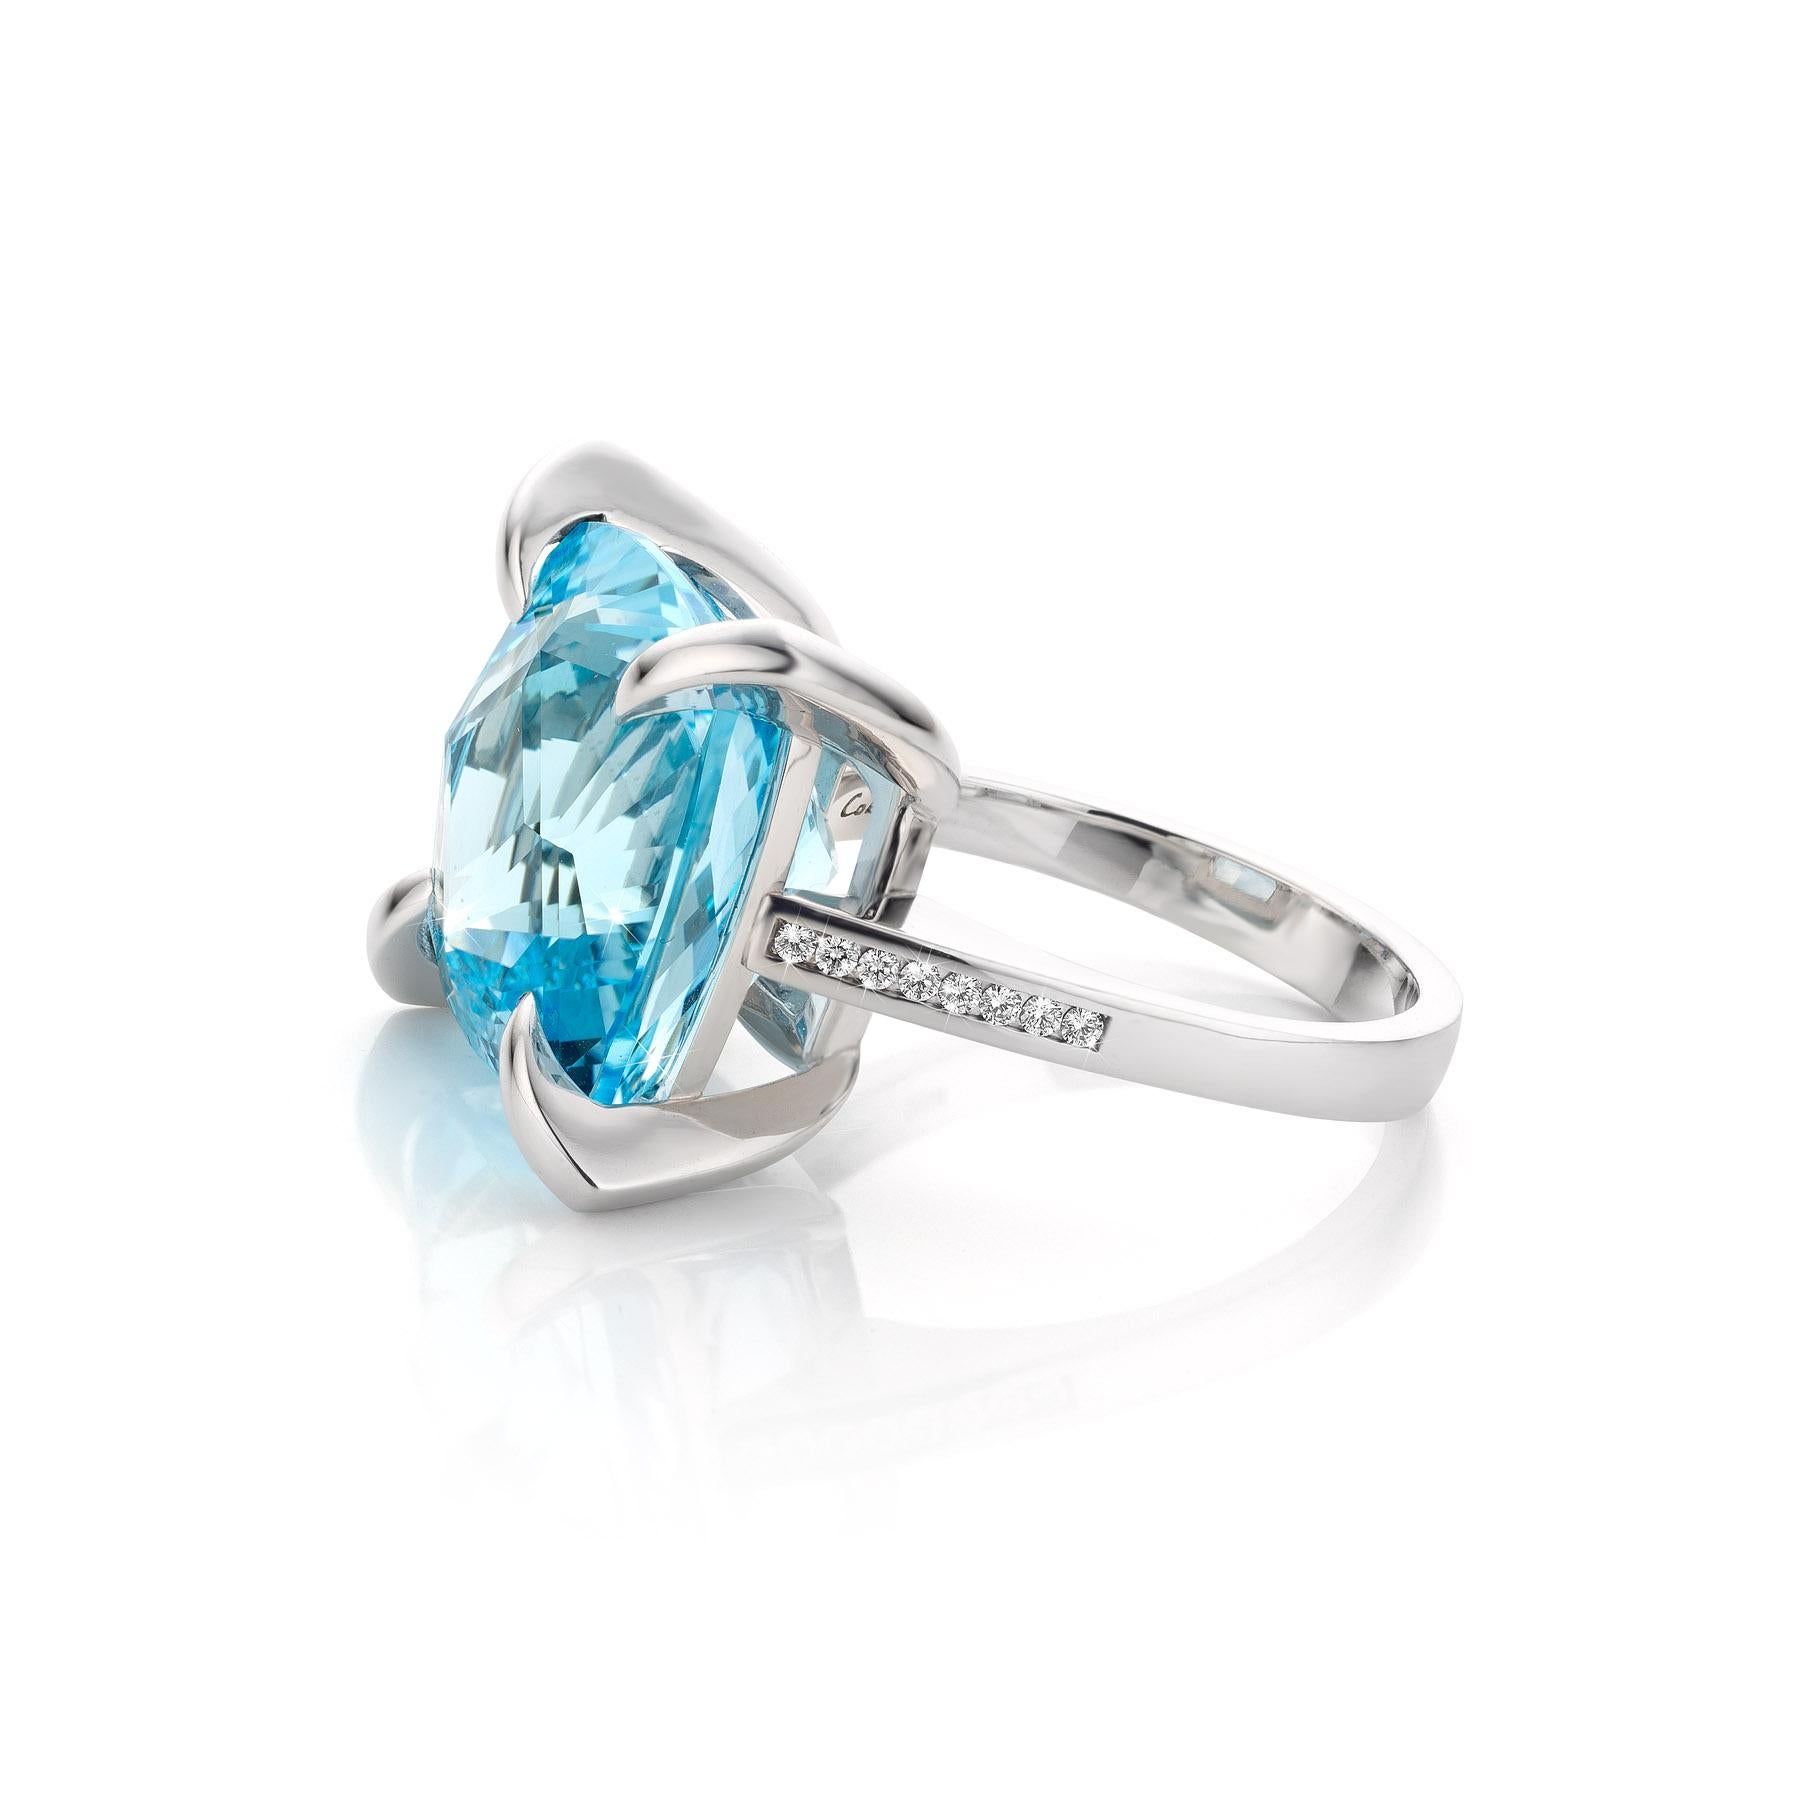 For Sale:  Fancy “Swiss Blue Statement” with Blue Topaz of 21.35 Carat and Diamonds Ring  4